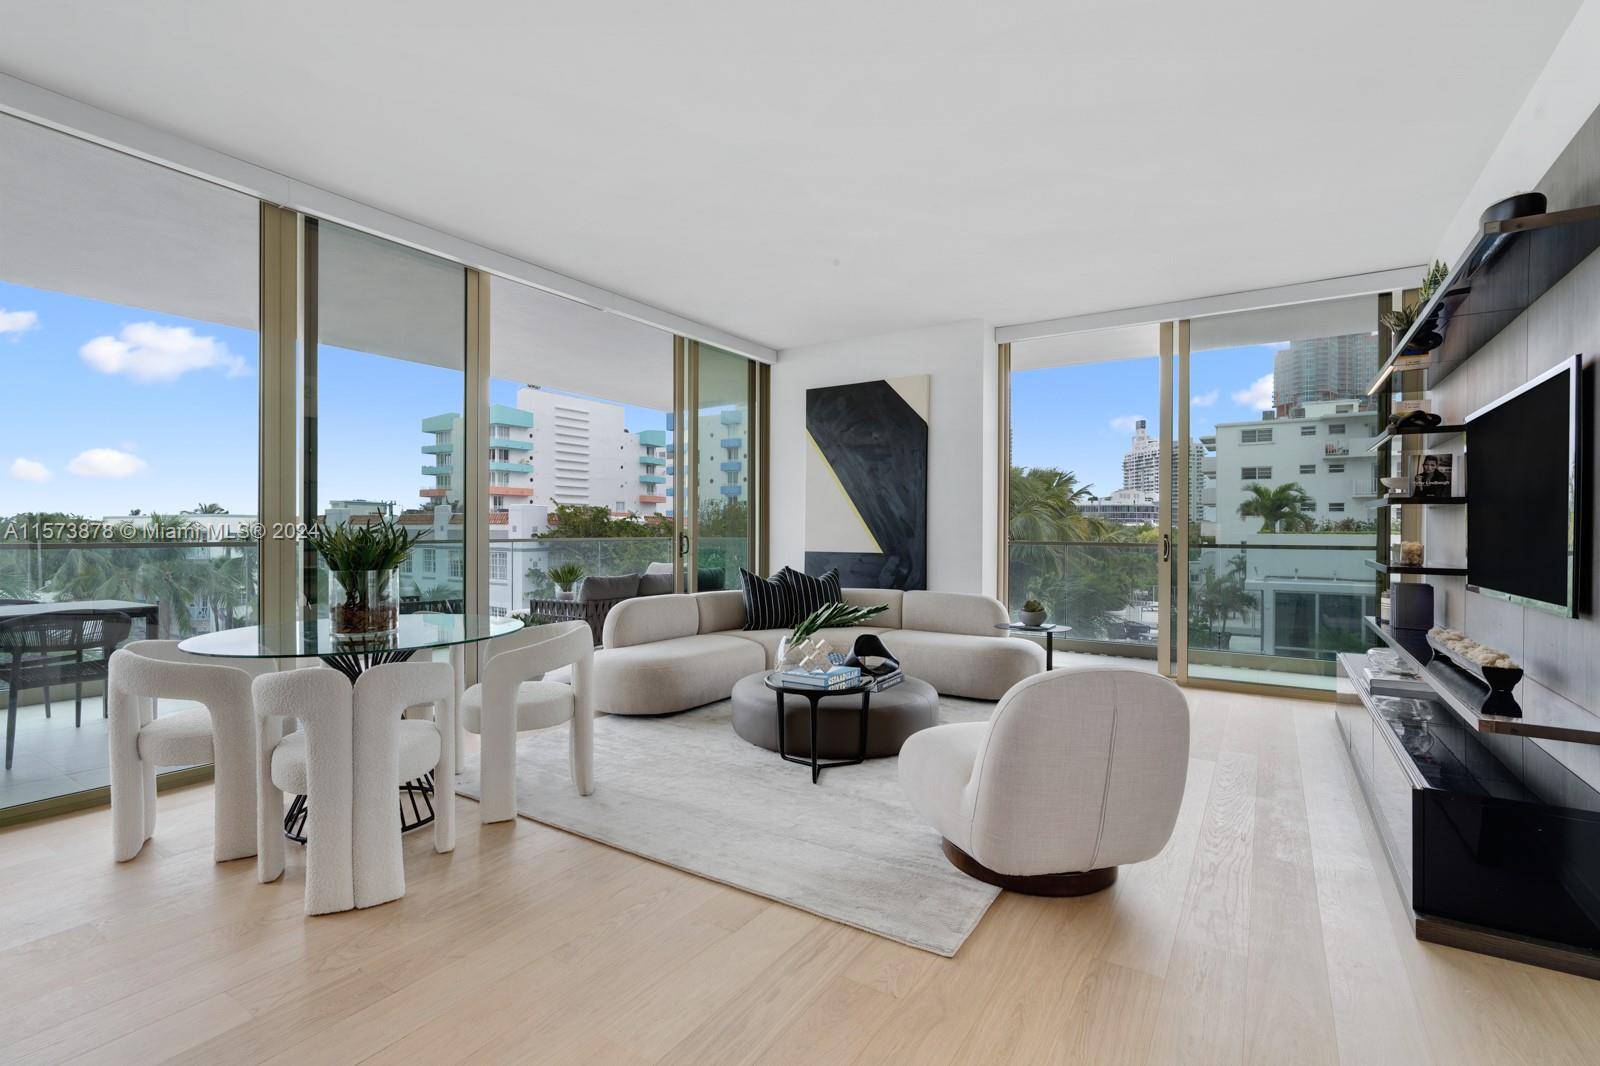 Step Inside With Me ! Enjoy elevated luxury living at 300 Collins in the heart of South of 5th.